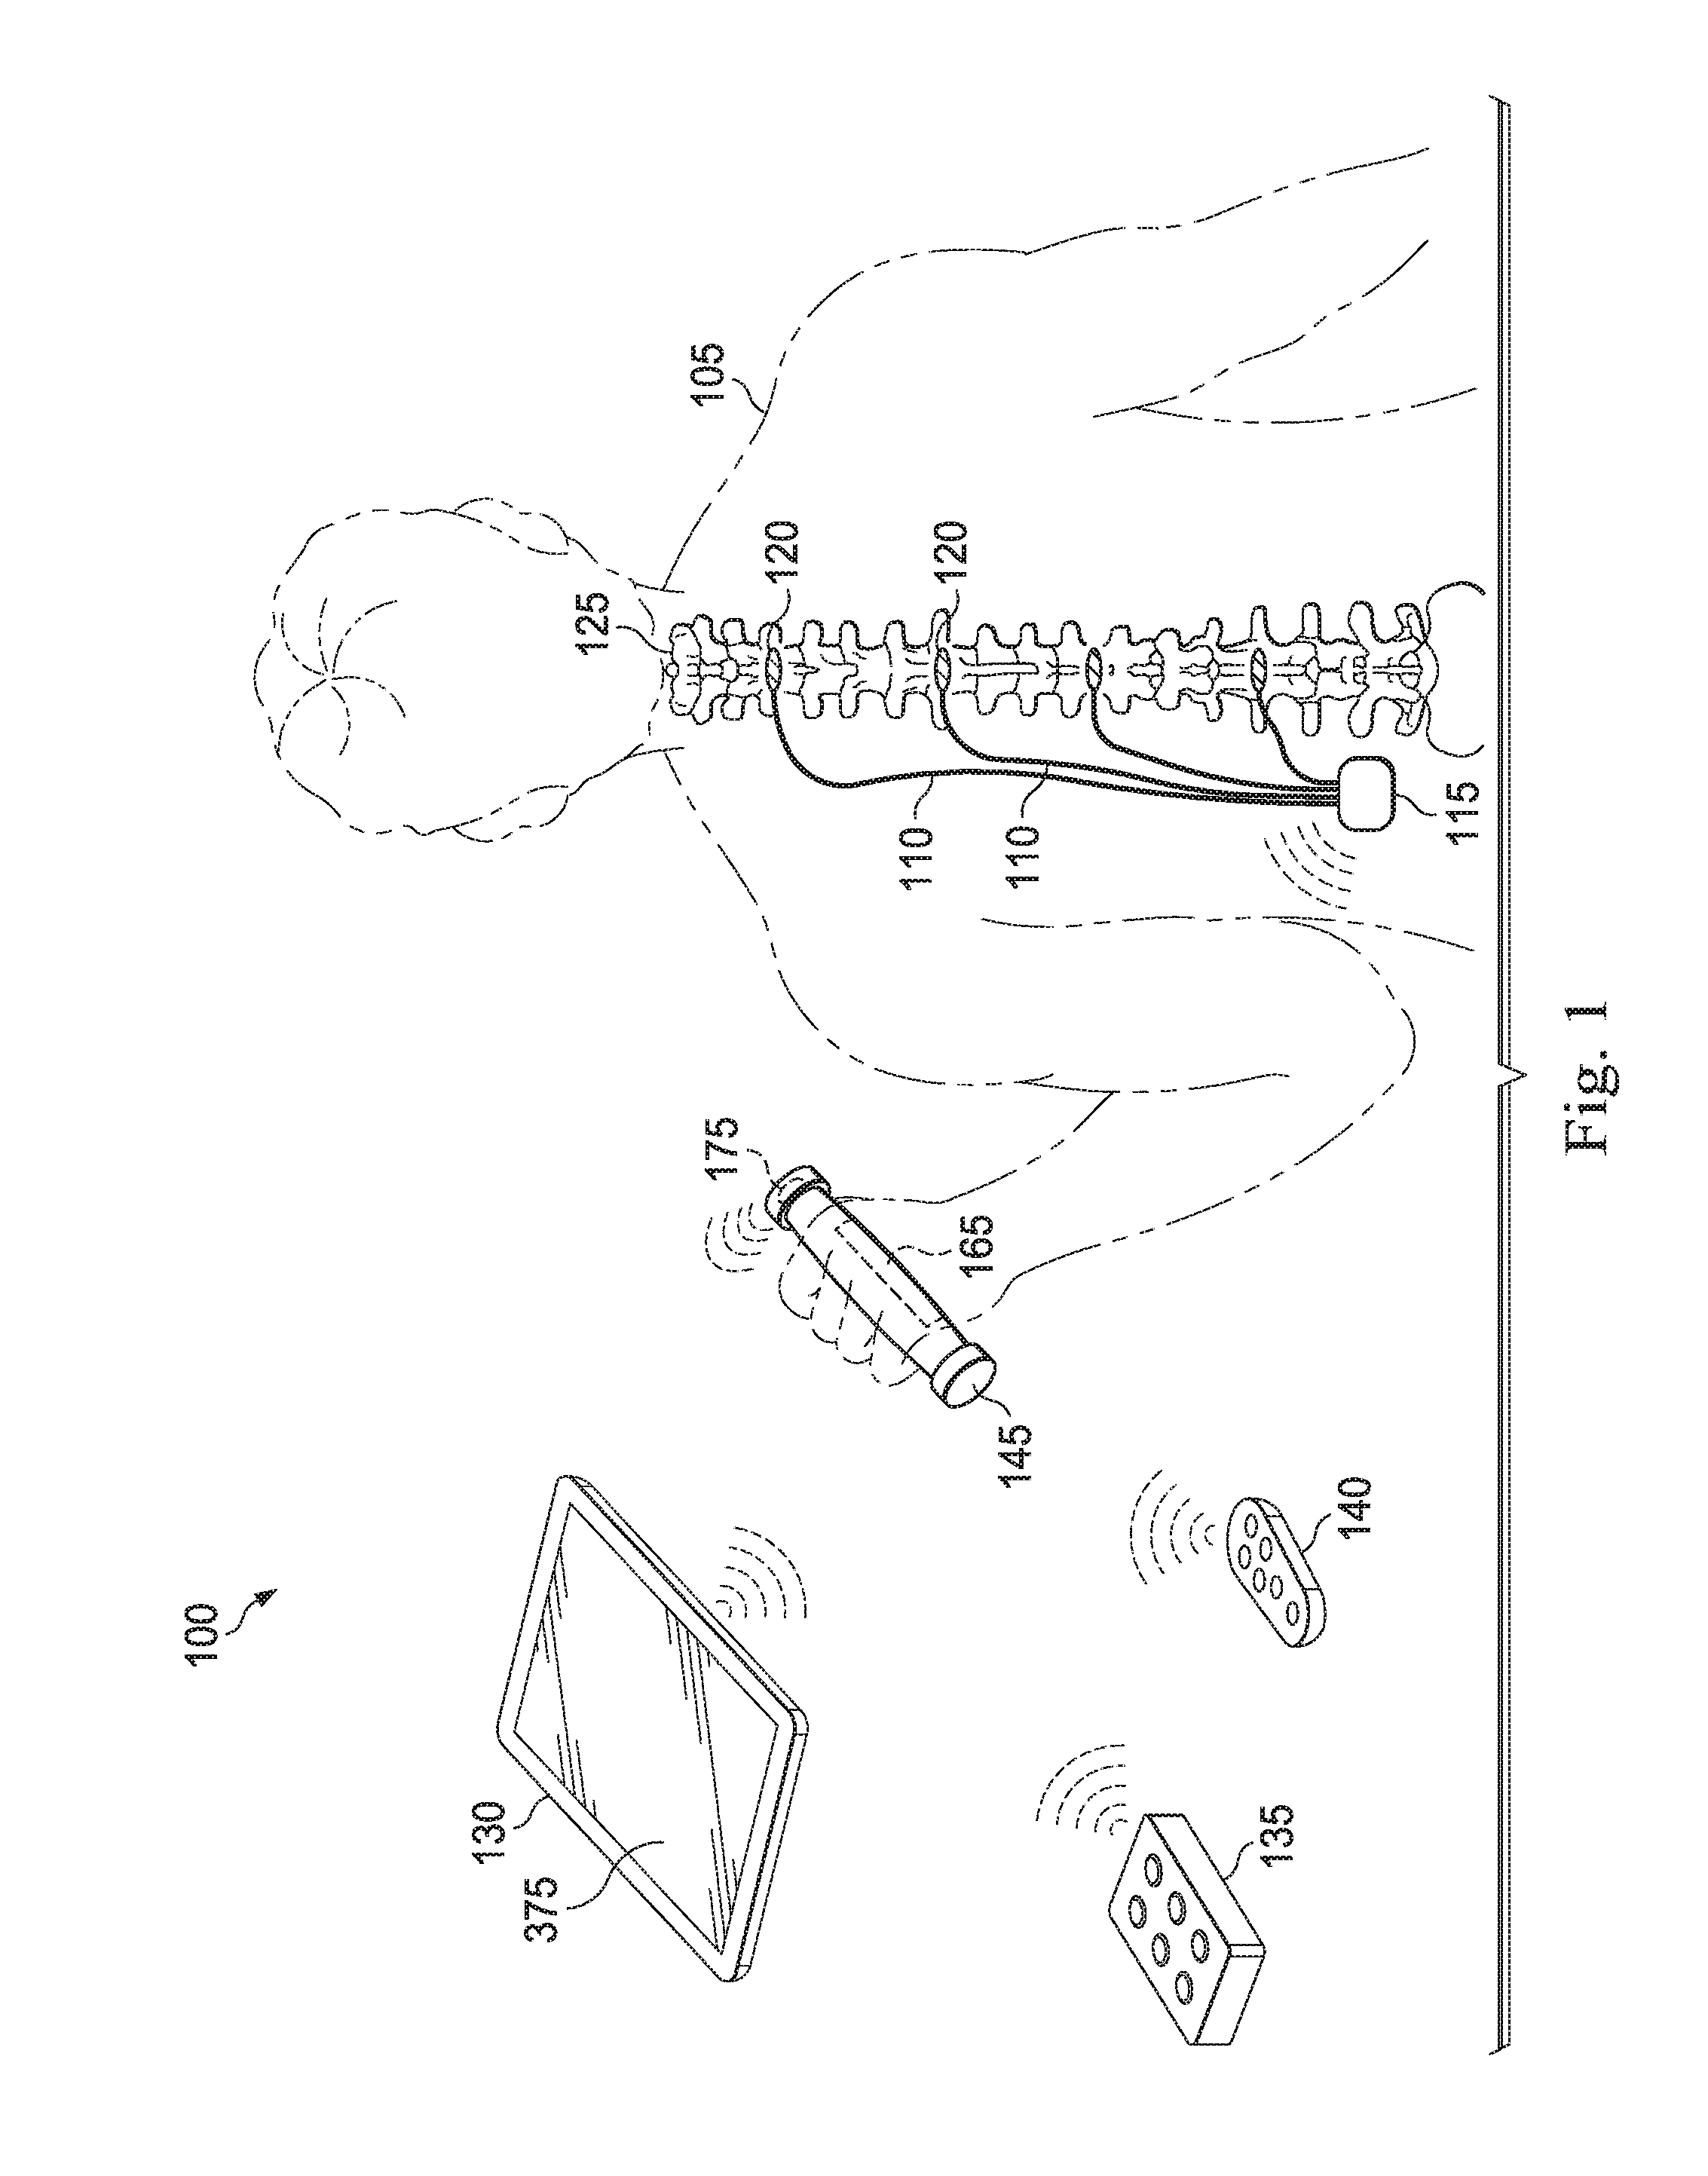 System and method of performing computer assisted stimulation programming (CASP) with a non-zero starting value customized to a patient